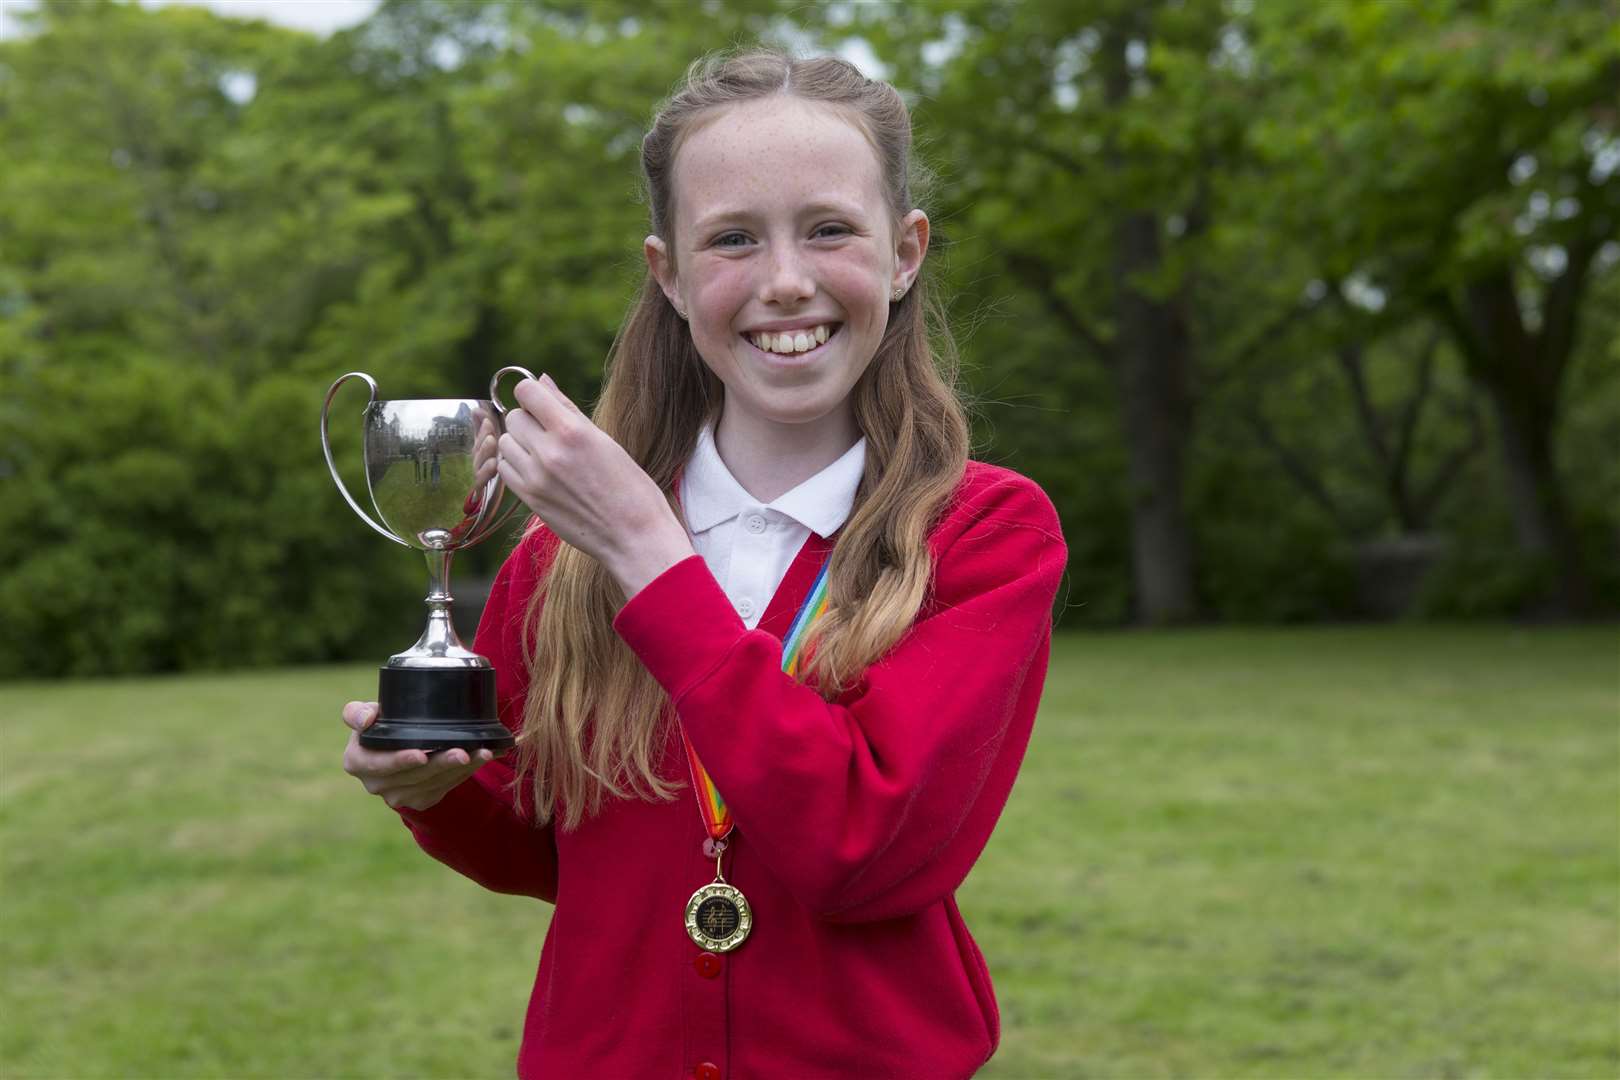 Emily Mackenzie, of Noss, won the Stroma Cup for P5 verse-speaking. Picture: Robert MacDonald / Northern Studios